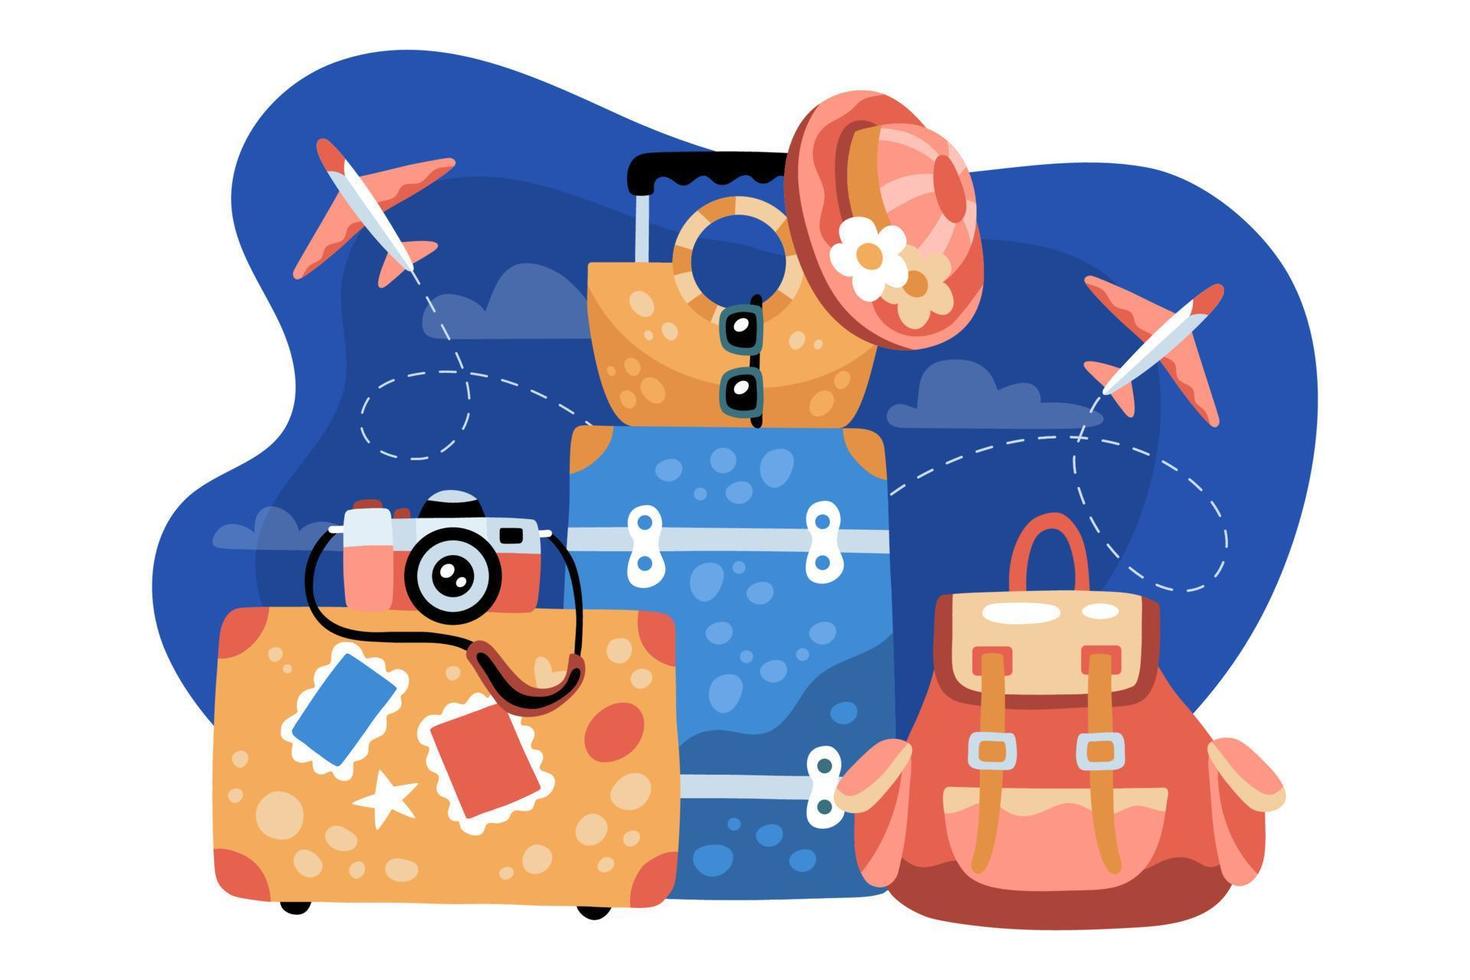 Touristic spot illustration or concept with various luggage, camera, planes and travel themed objects vector